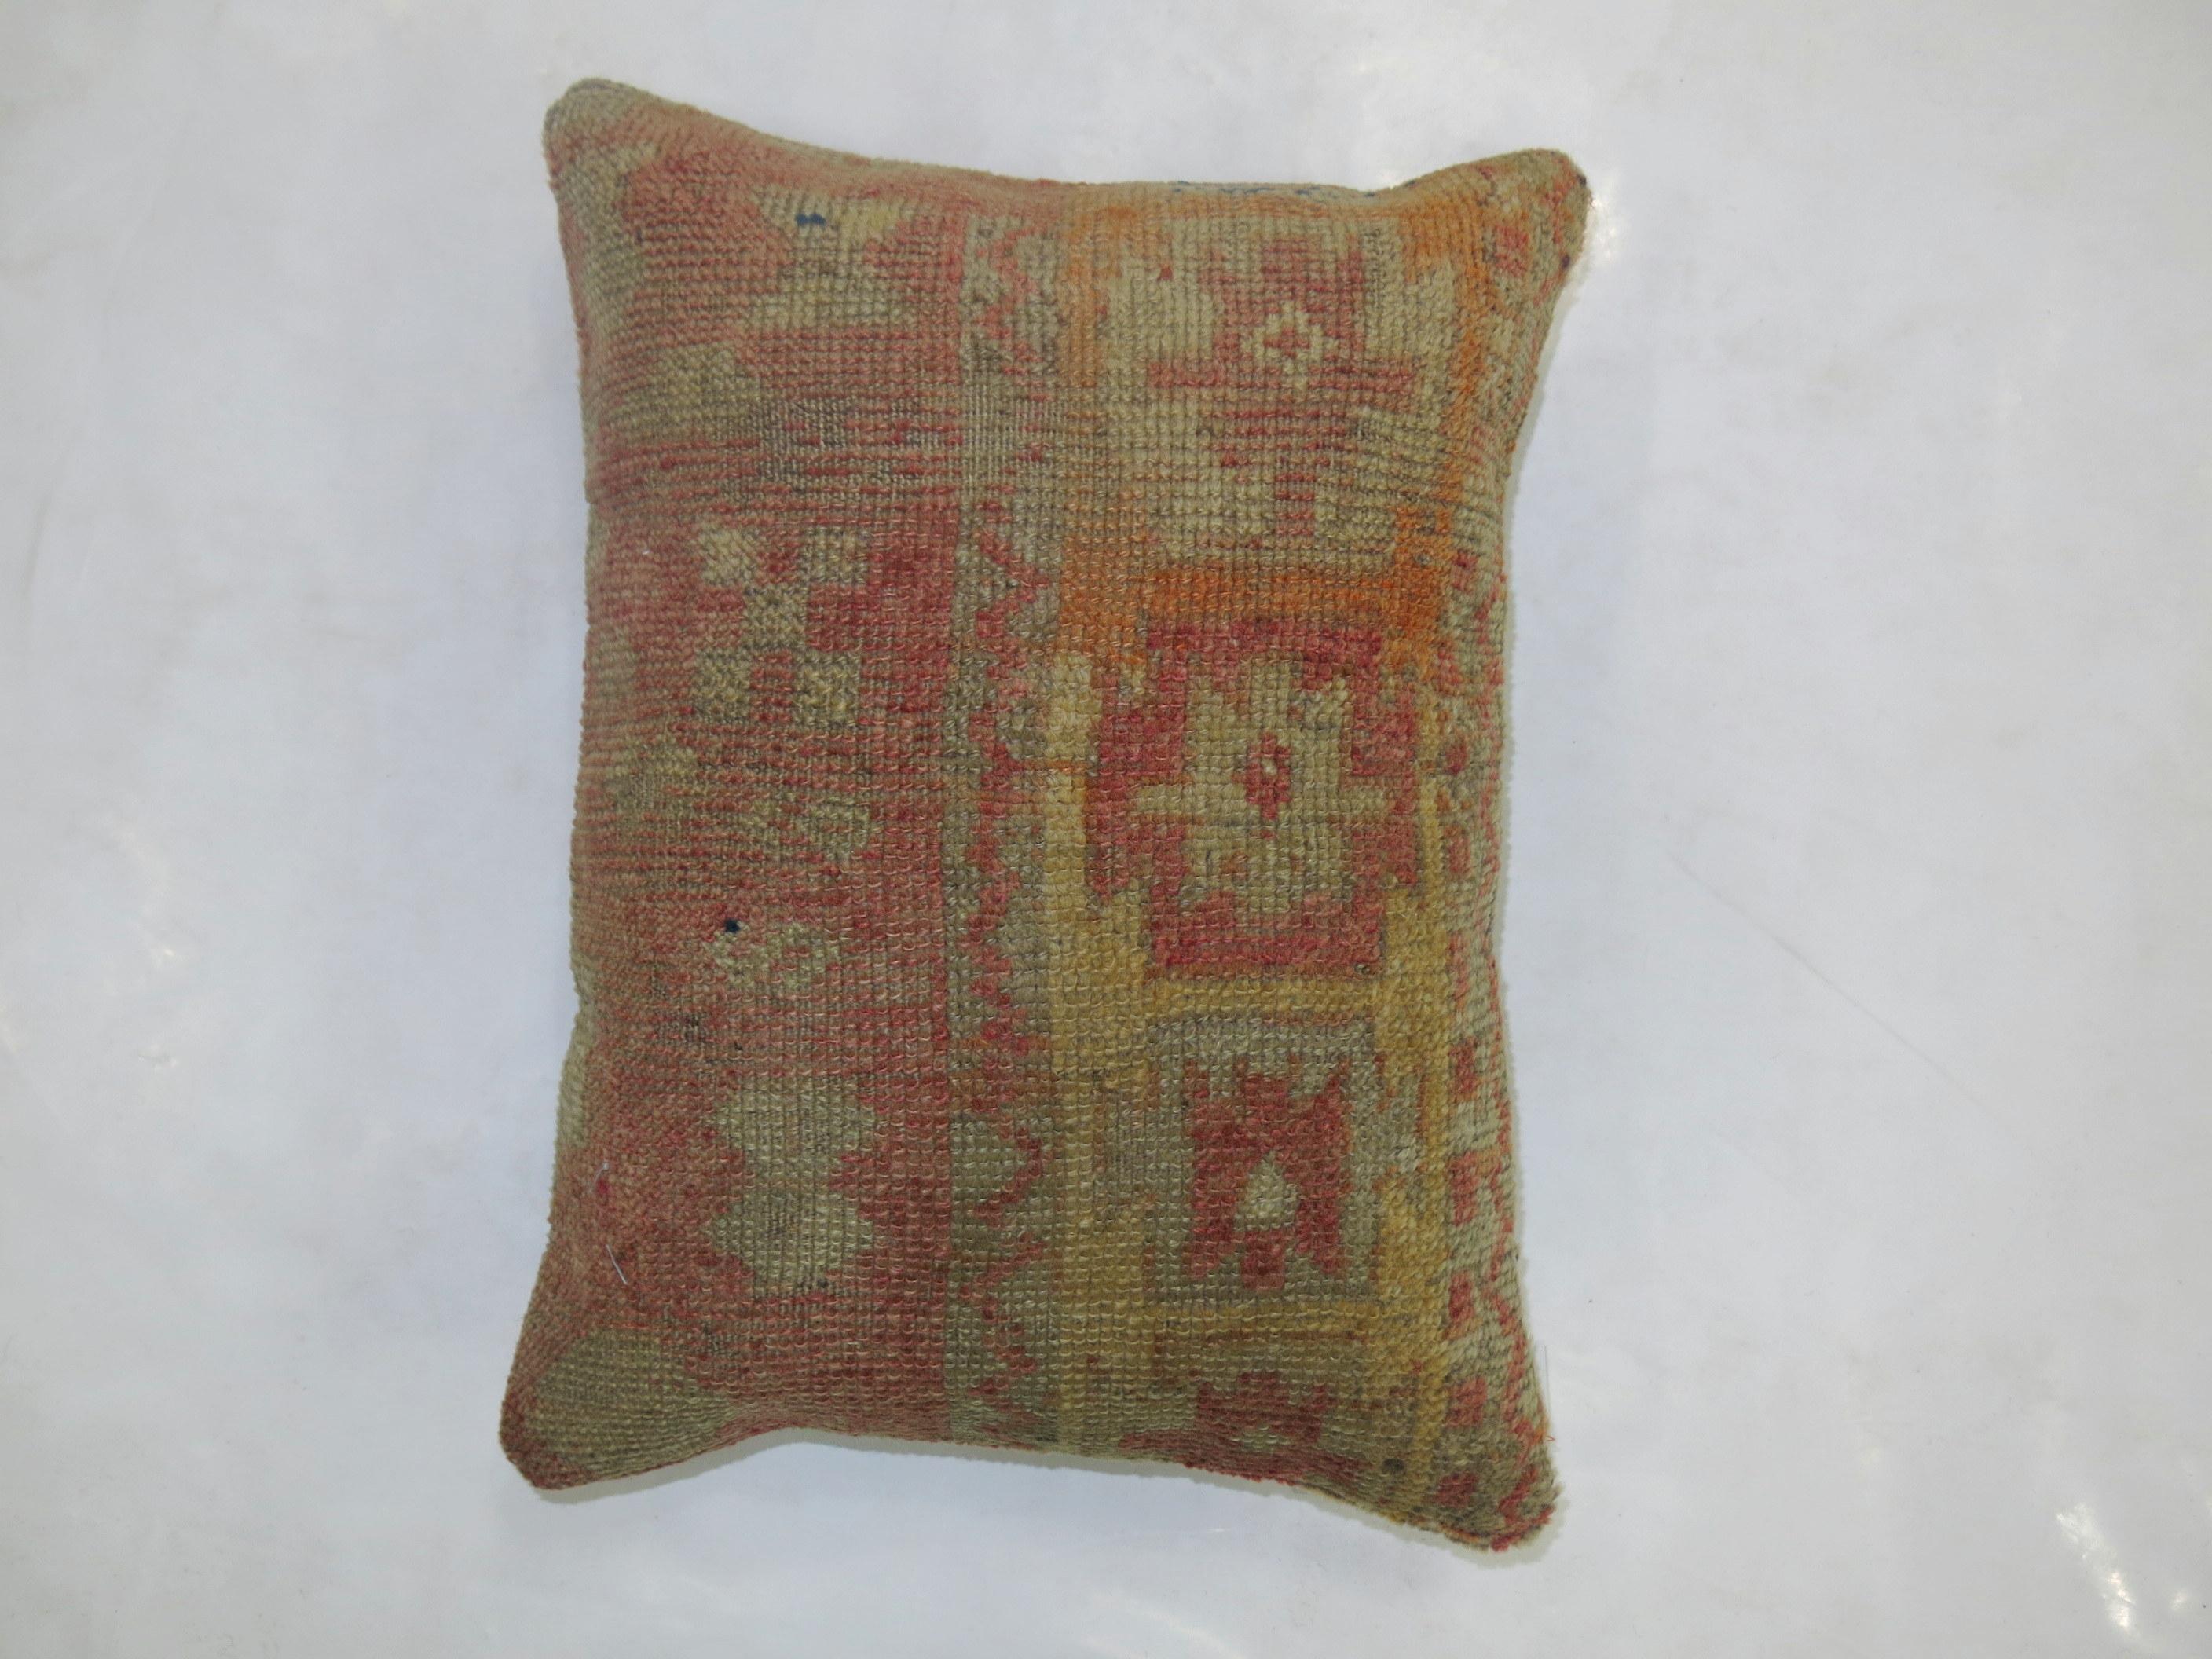 Pillow made from a vintage turkish anatolian rug

Measures: 13'' x 18''